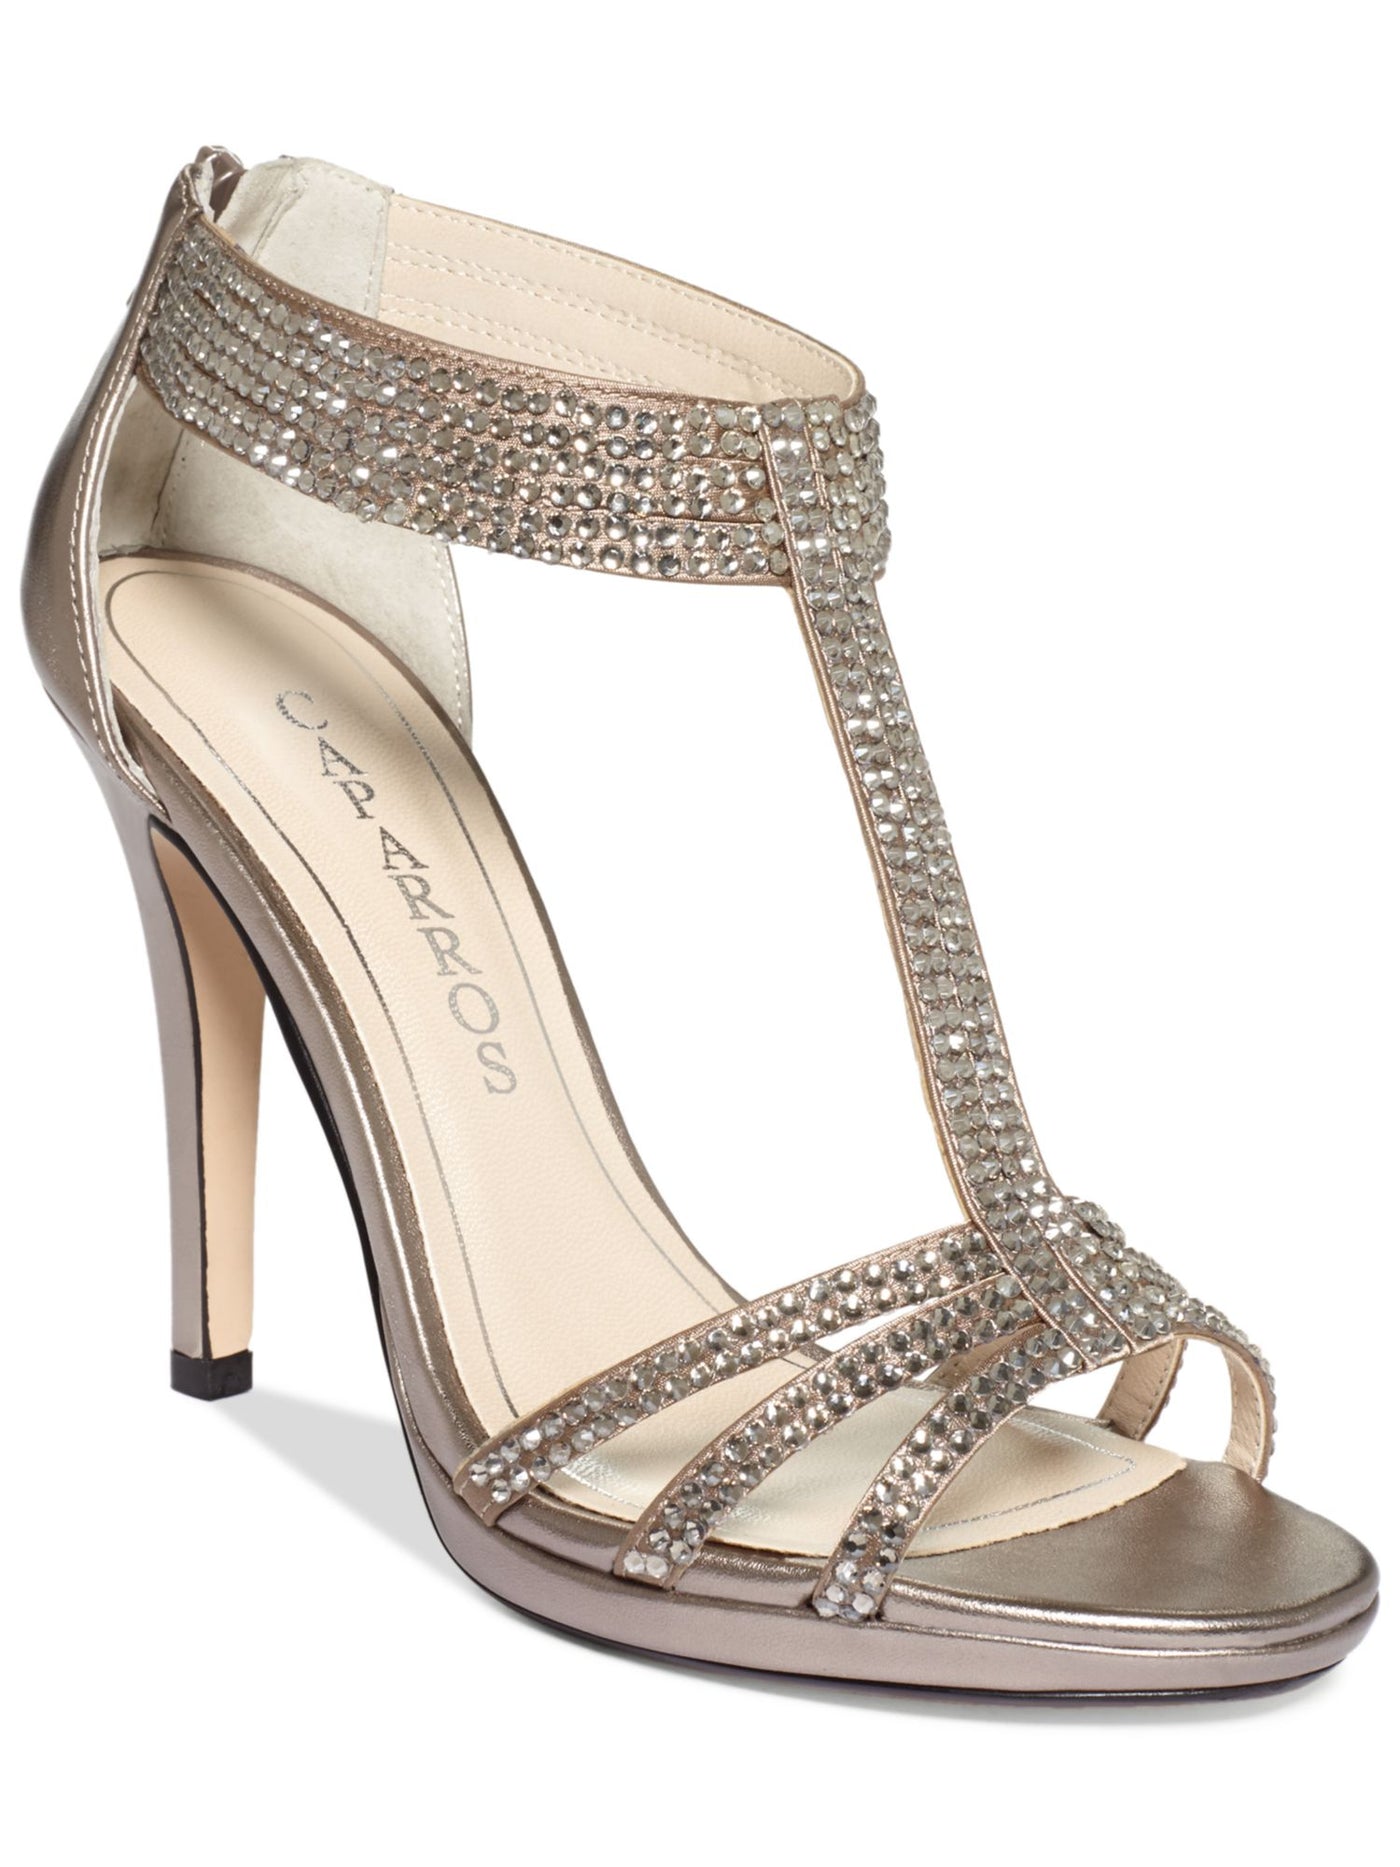 CAPARROS Womens Beige Rhinestone Strappy Maddy Round Toe Stiletto Zip-Up Dress Sandals Shoes 9.5 B